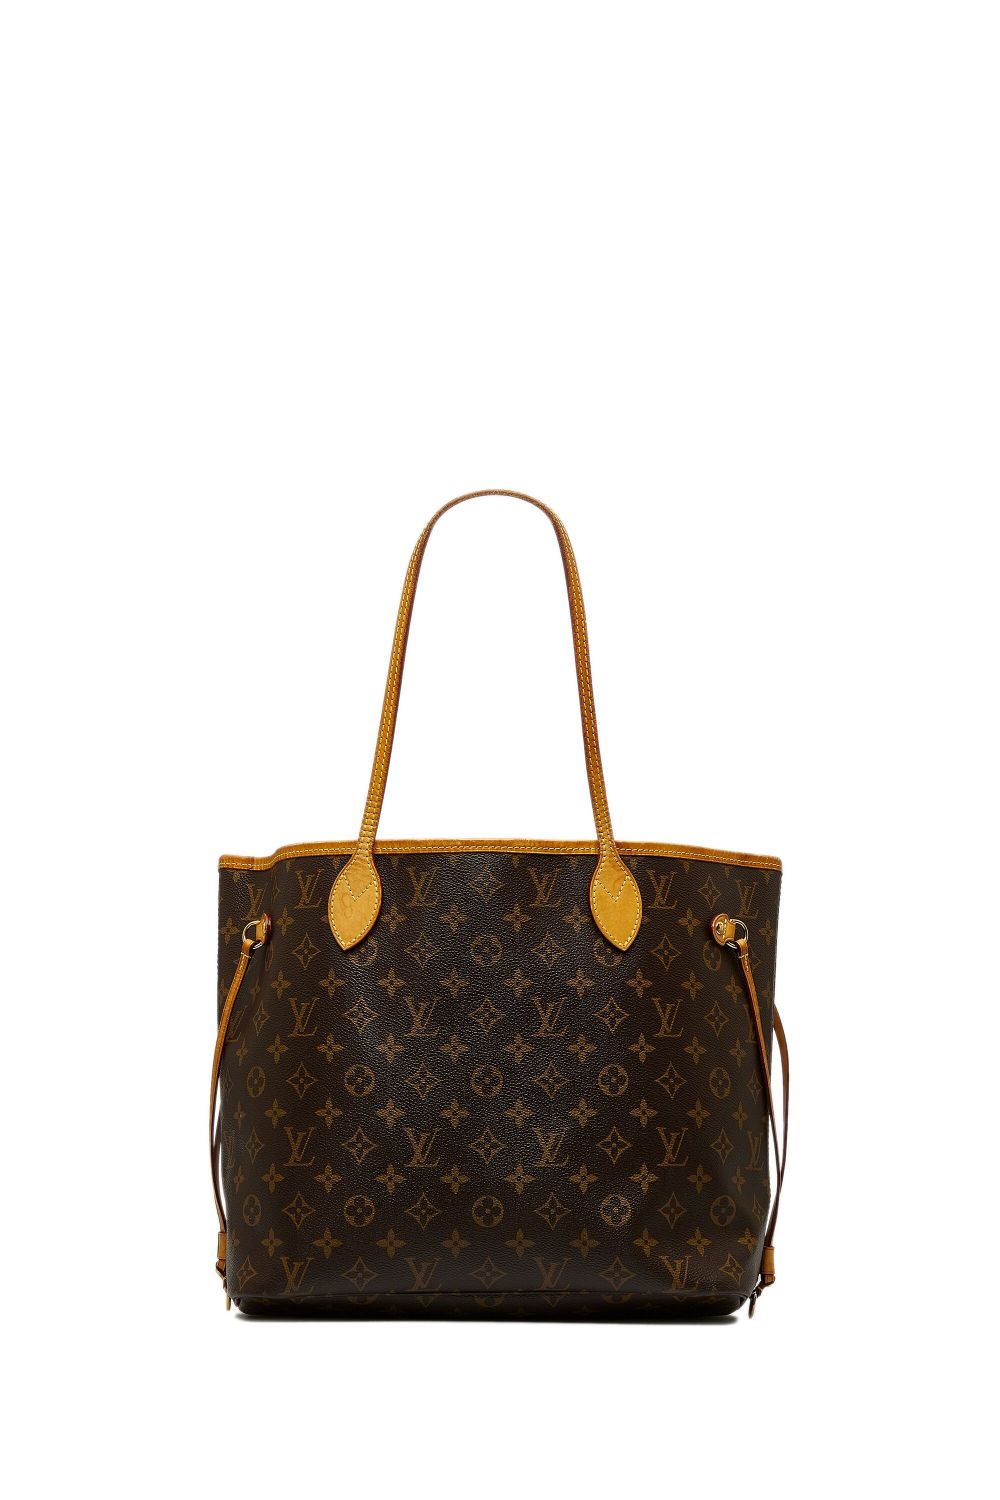 Pre-owned Louis Vuitton 2014   Monogram Neverfull Mm Tote Bag In Brown